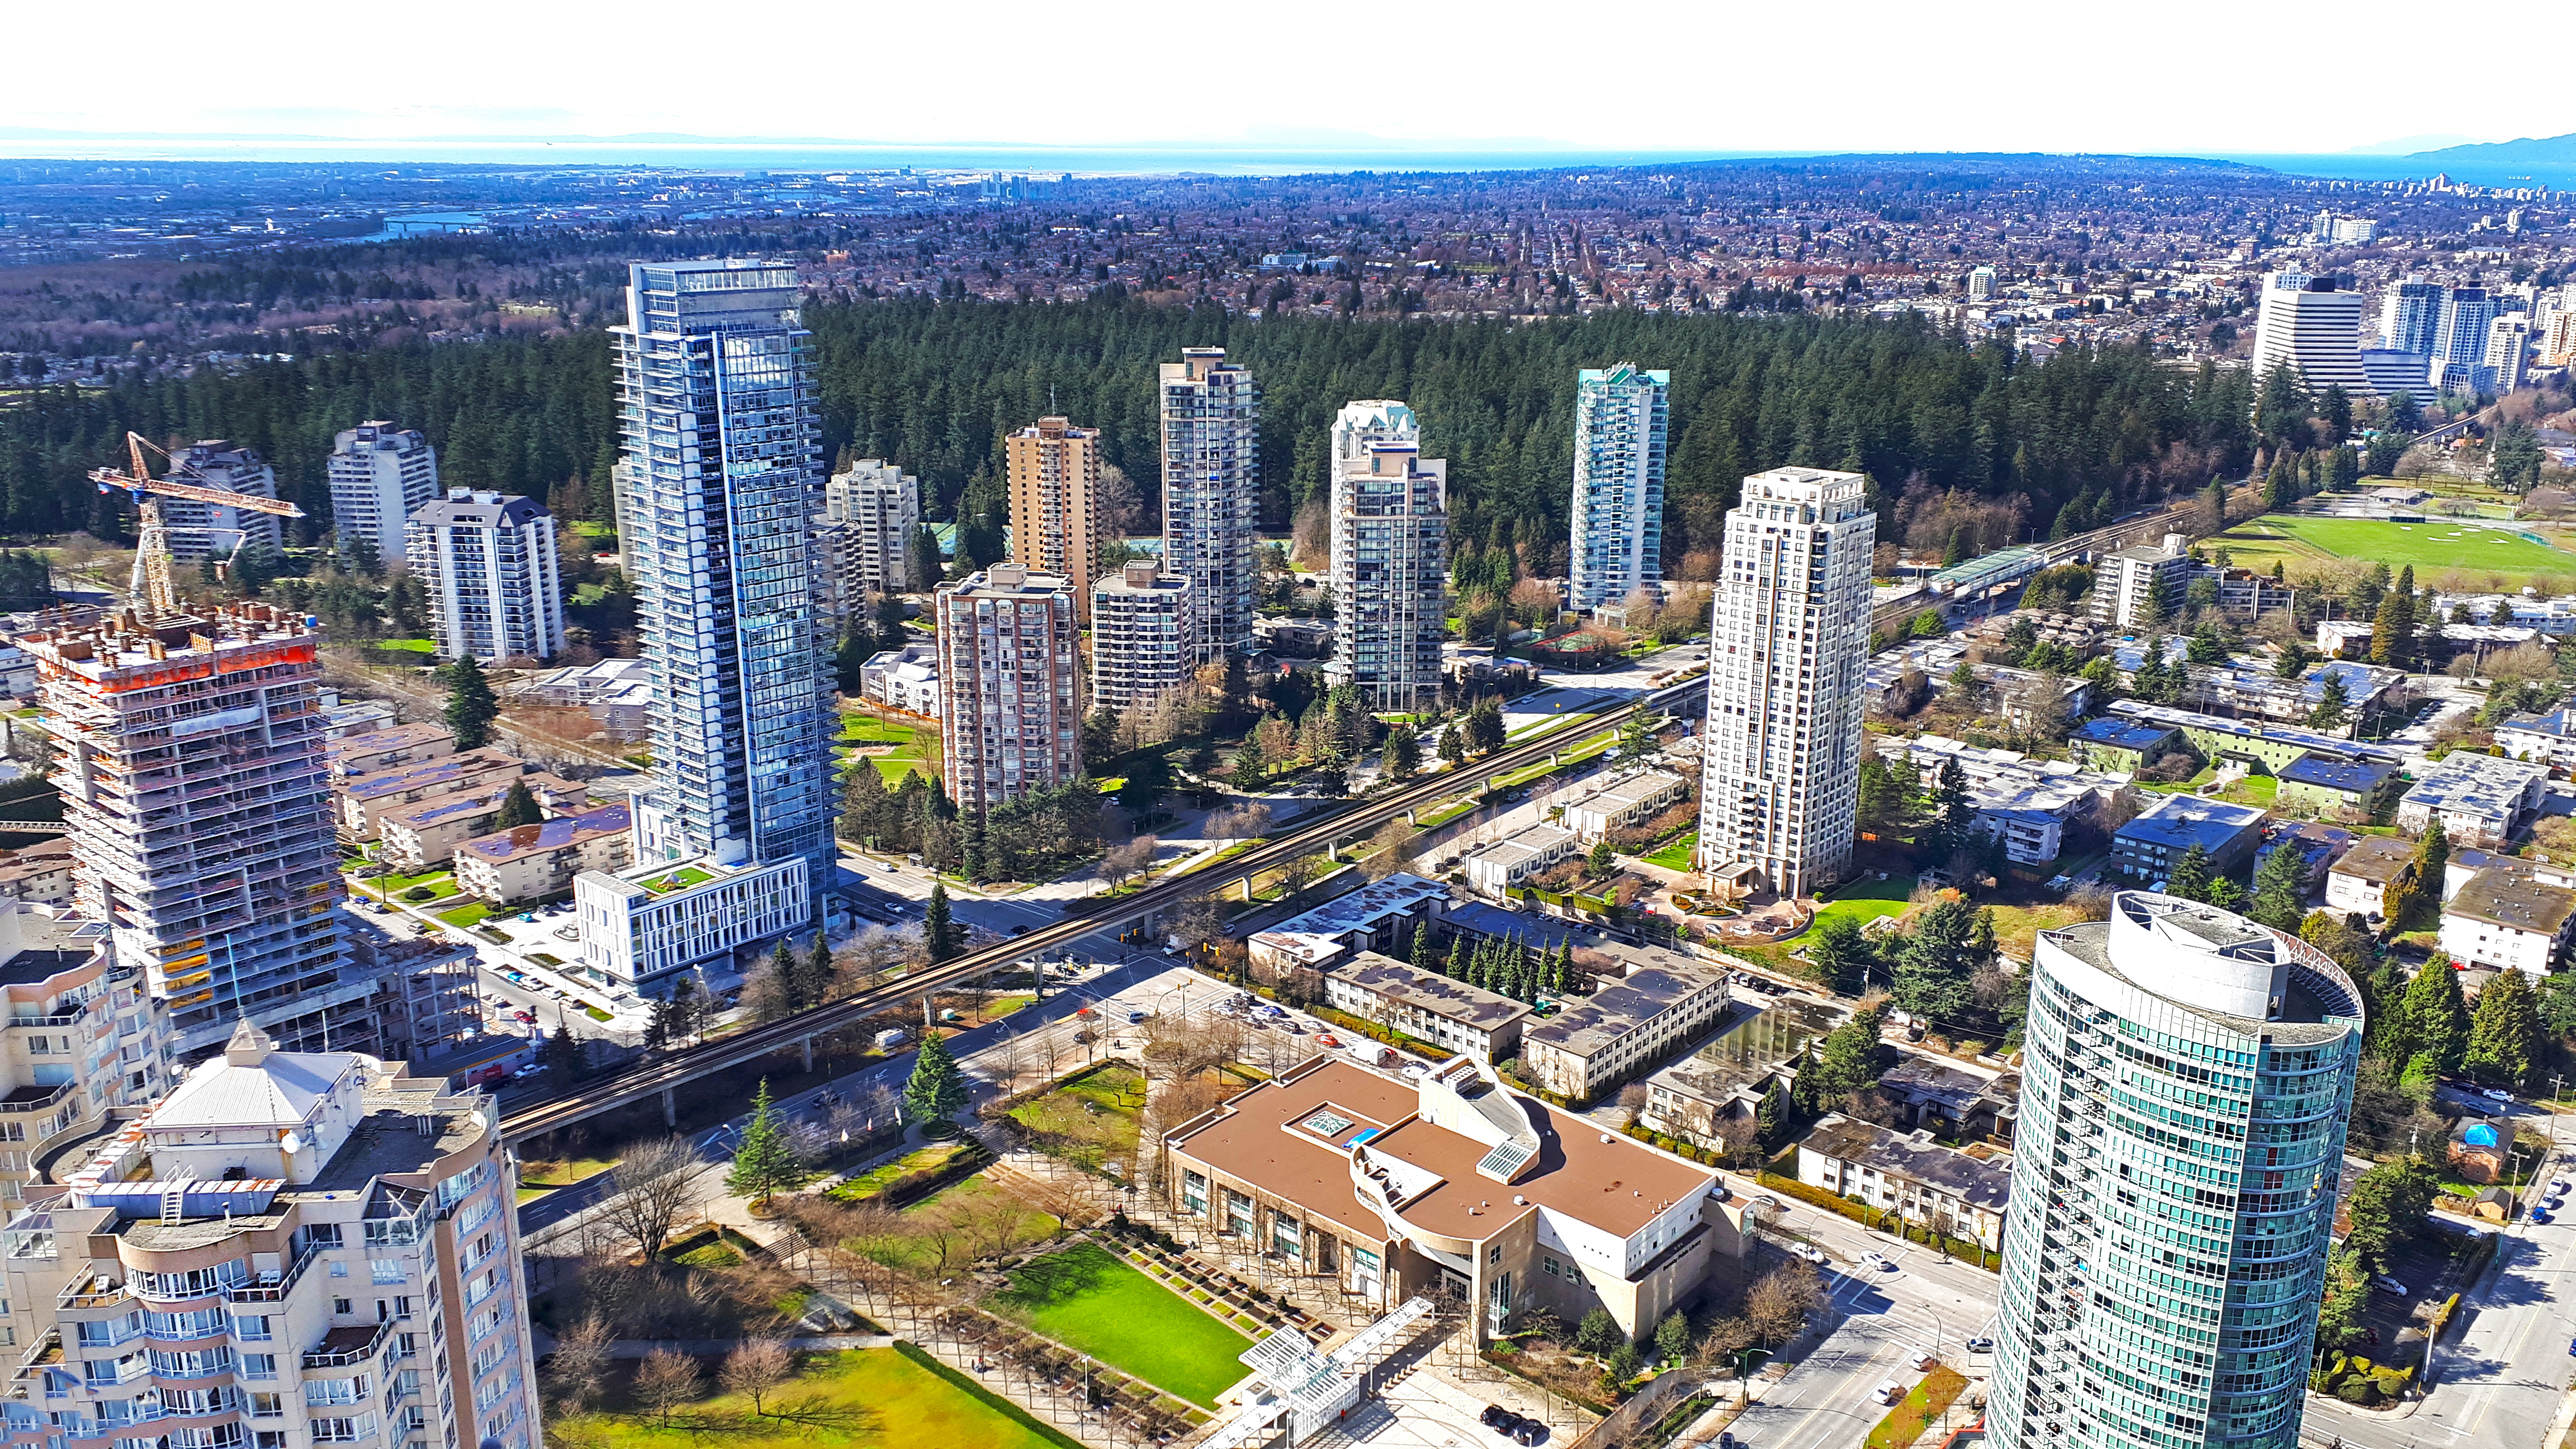 Burnaby real estate investment